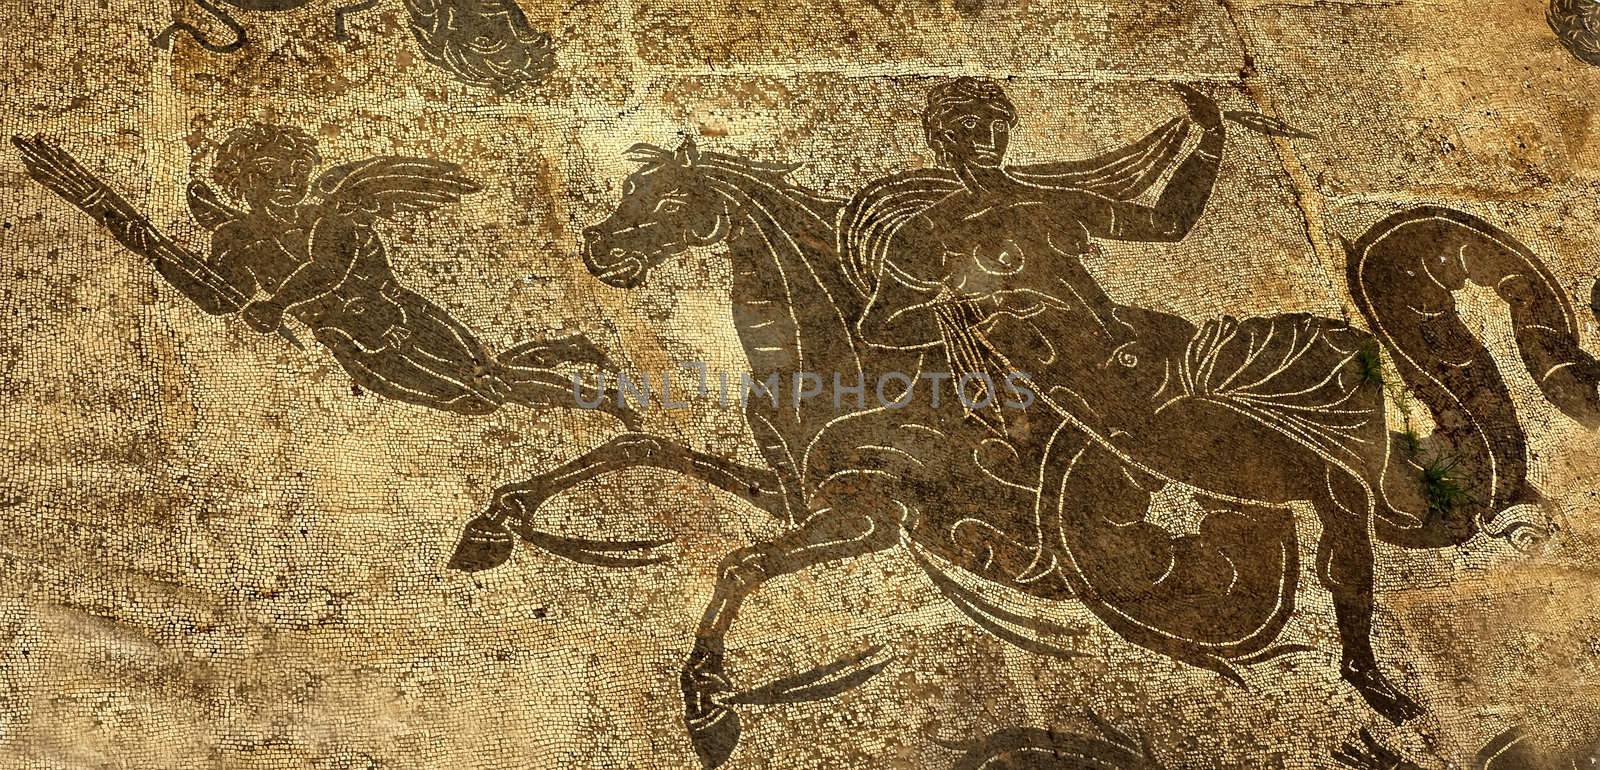 Ancient Roman Woman on Horse Cupid Mosaic Floors Baths of Neptune Ostia Antica Ruins Rome Italy
Excavation of Ostia, ancient Roman port, next to airport.  Was port for Rome until 5th Century AD.